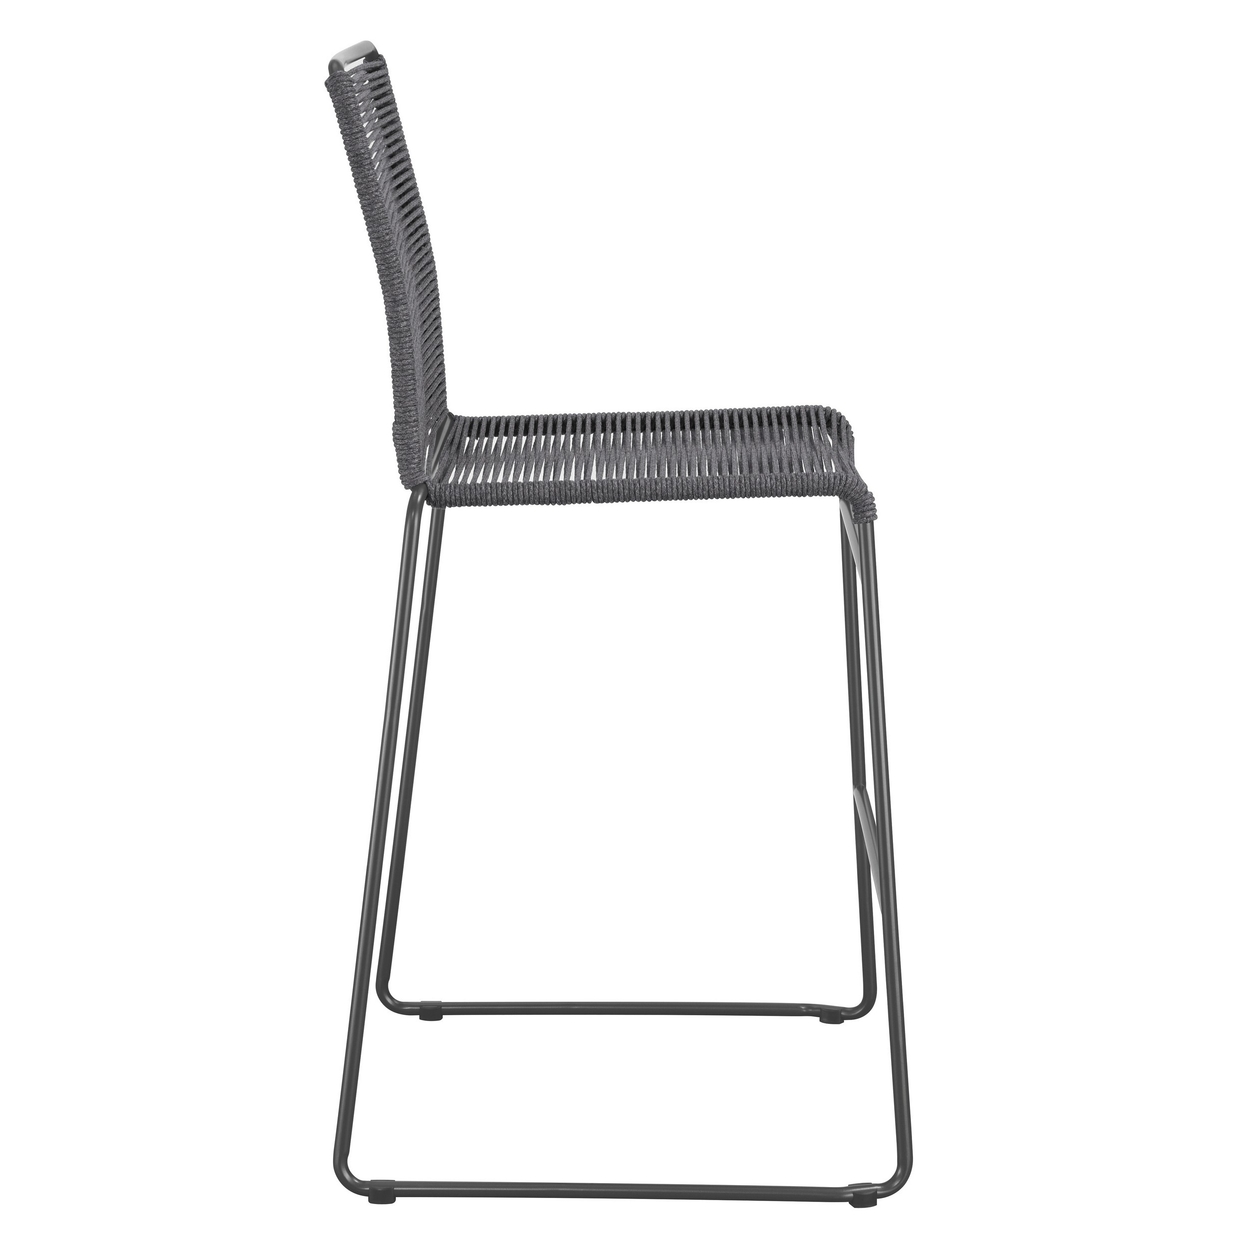 Nee 30 Inch Set Of 2 Barstool Chairs With Footrests, Charcoal Gray Rope- Saltoro Sherpi